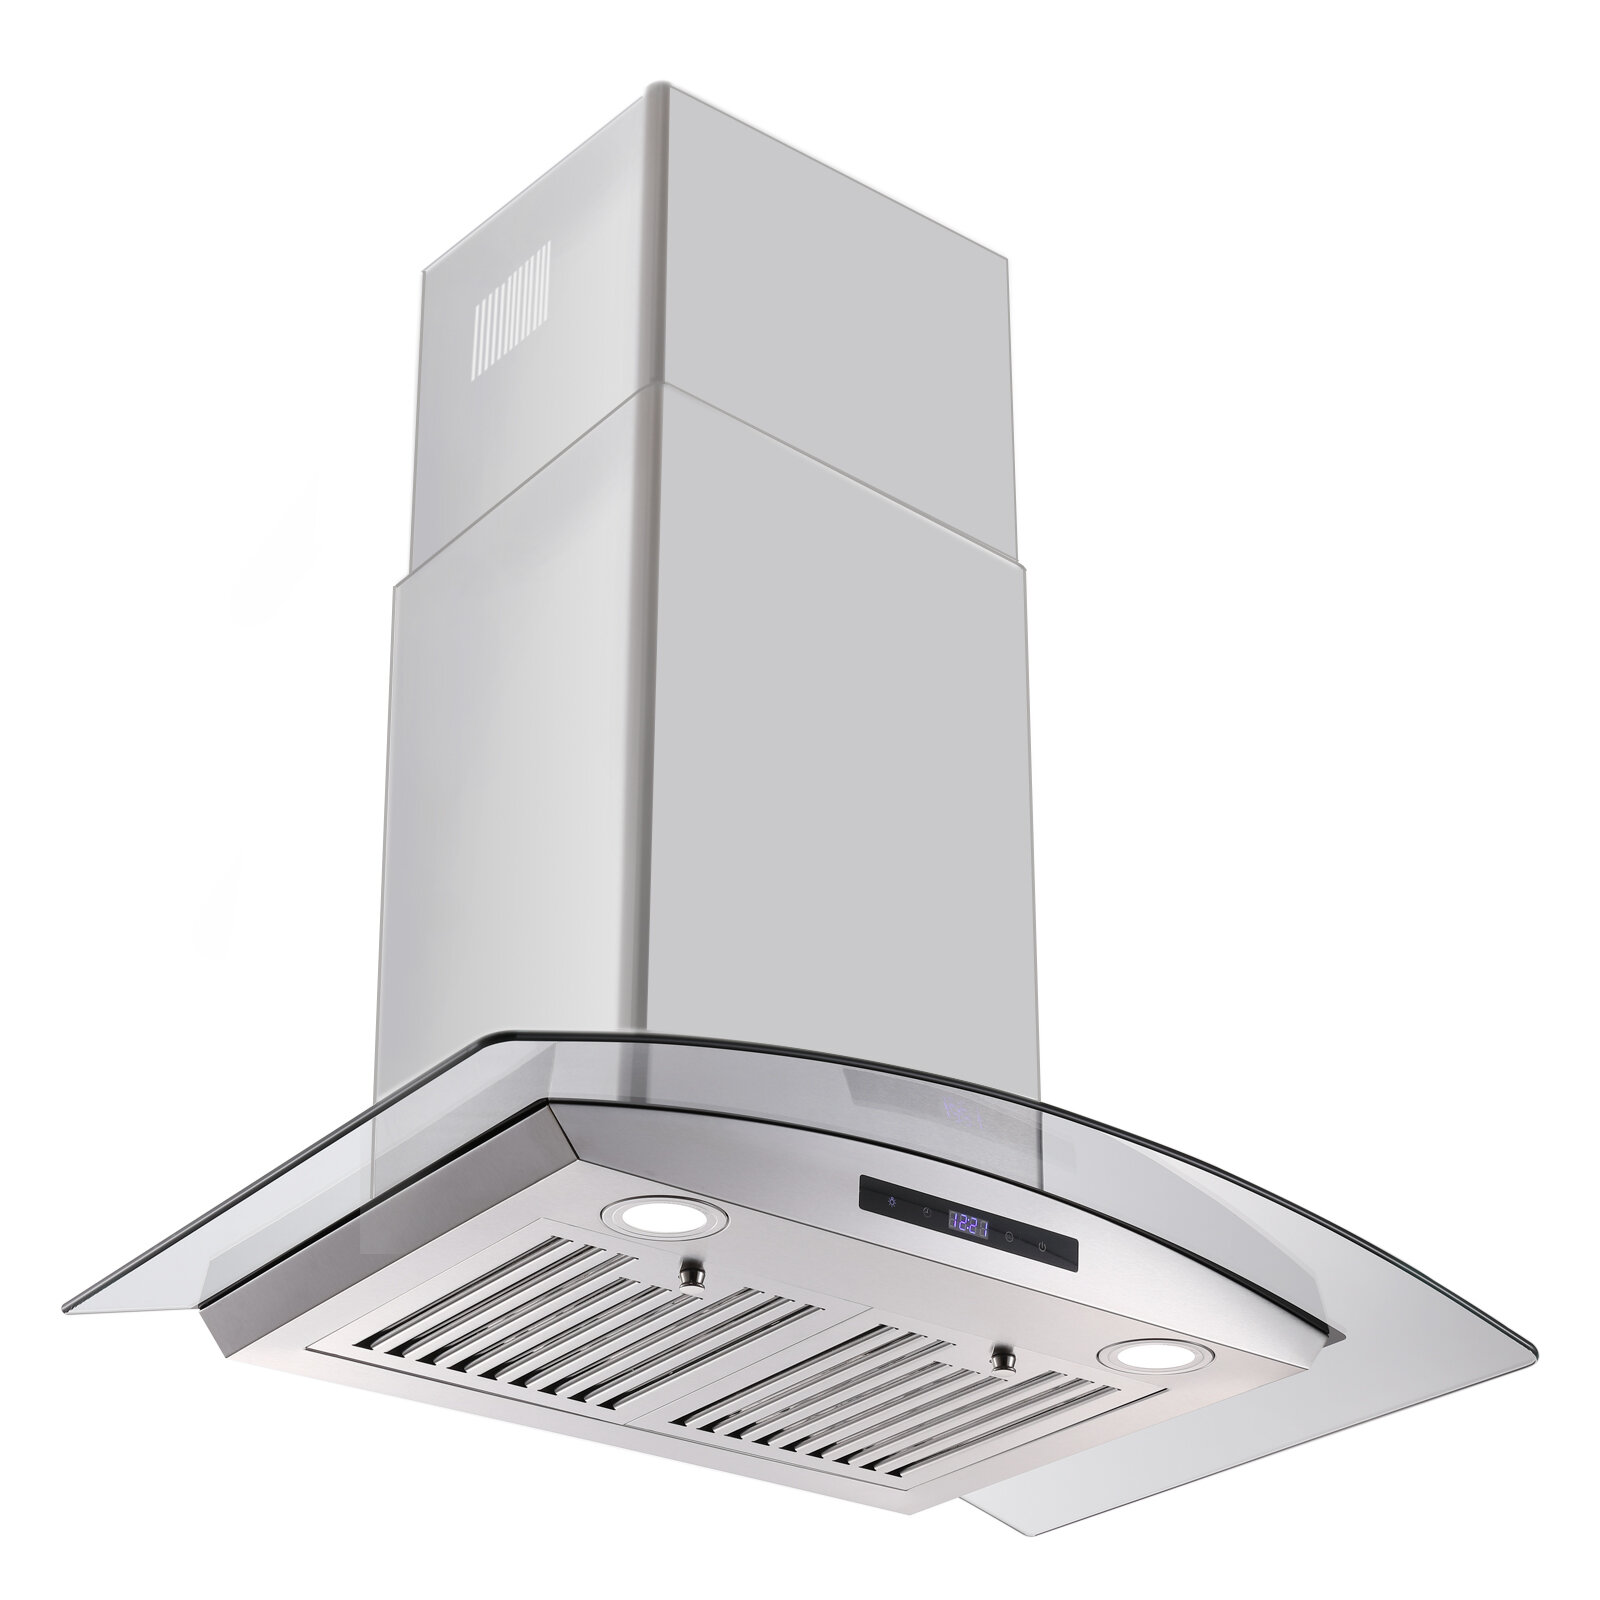 Tieasy Wall Mounted Range Hood 30 inch Touch Control Vents for